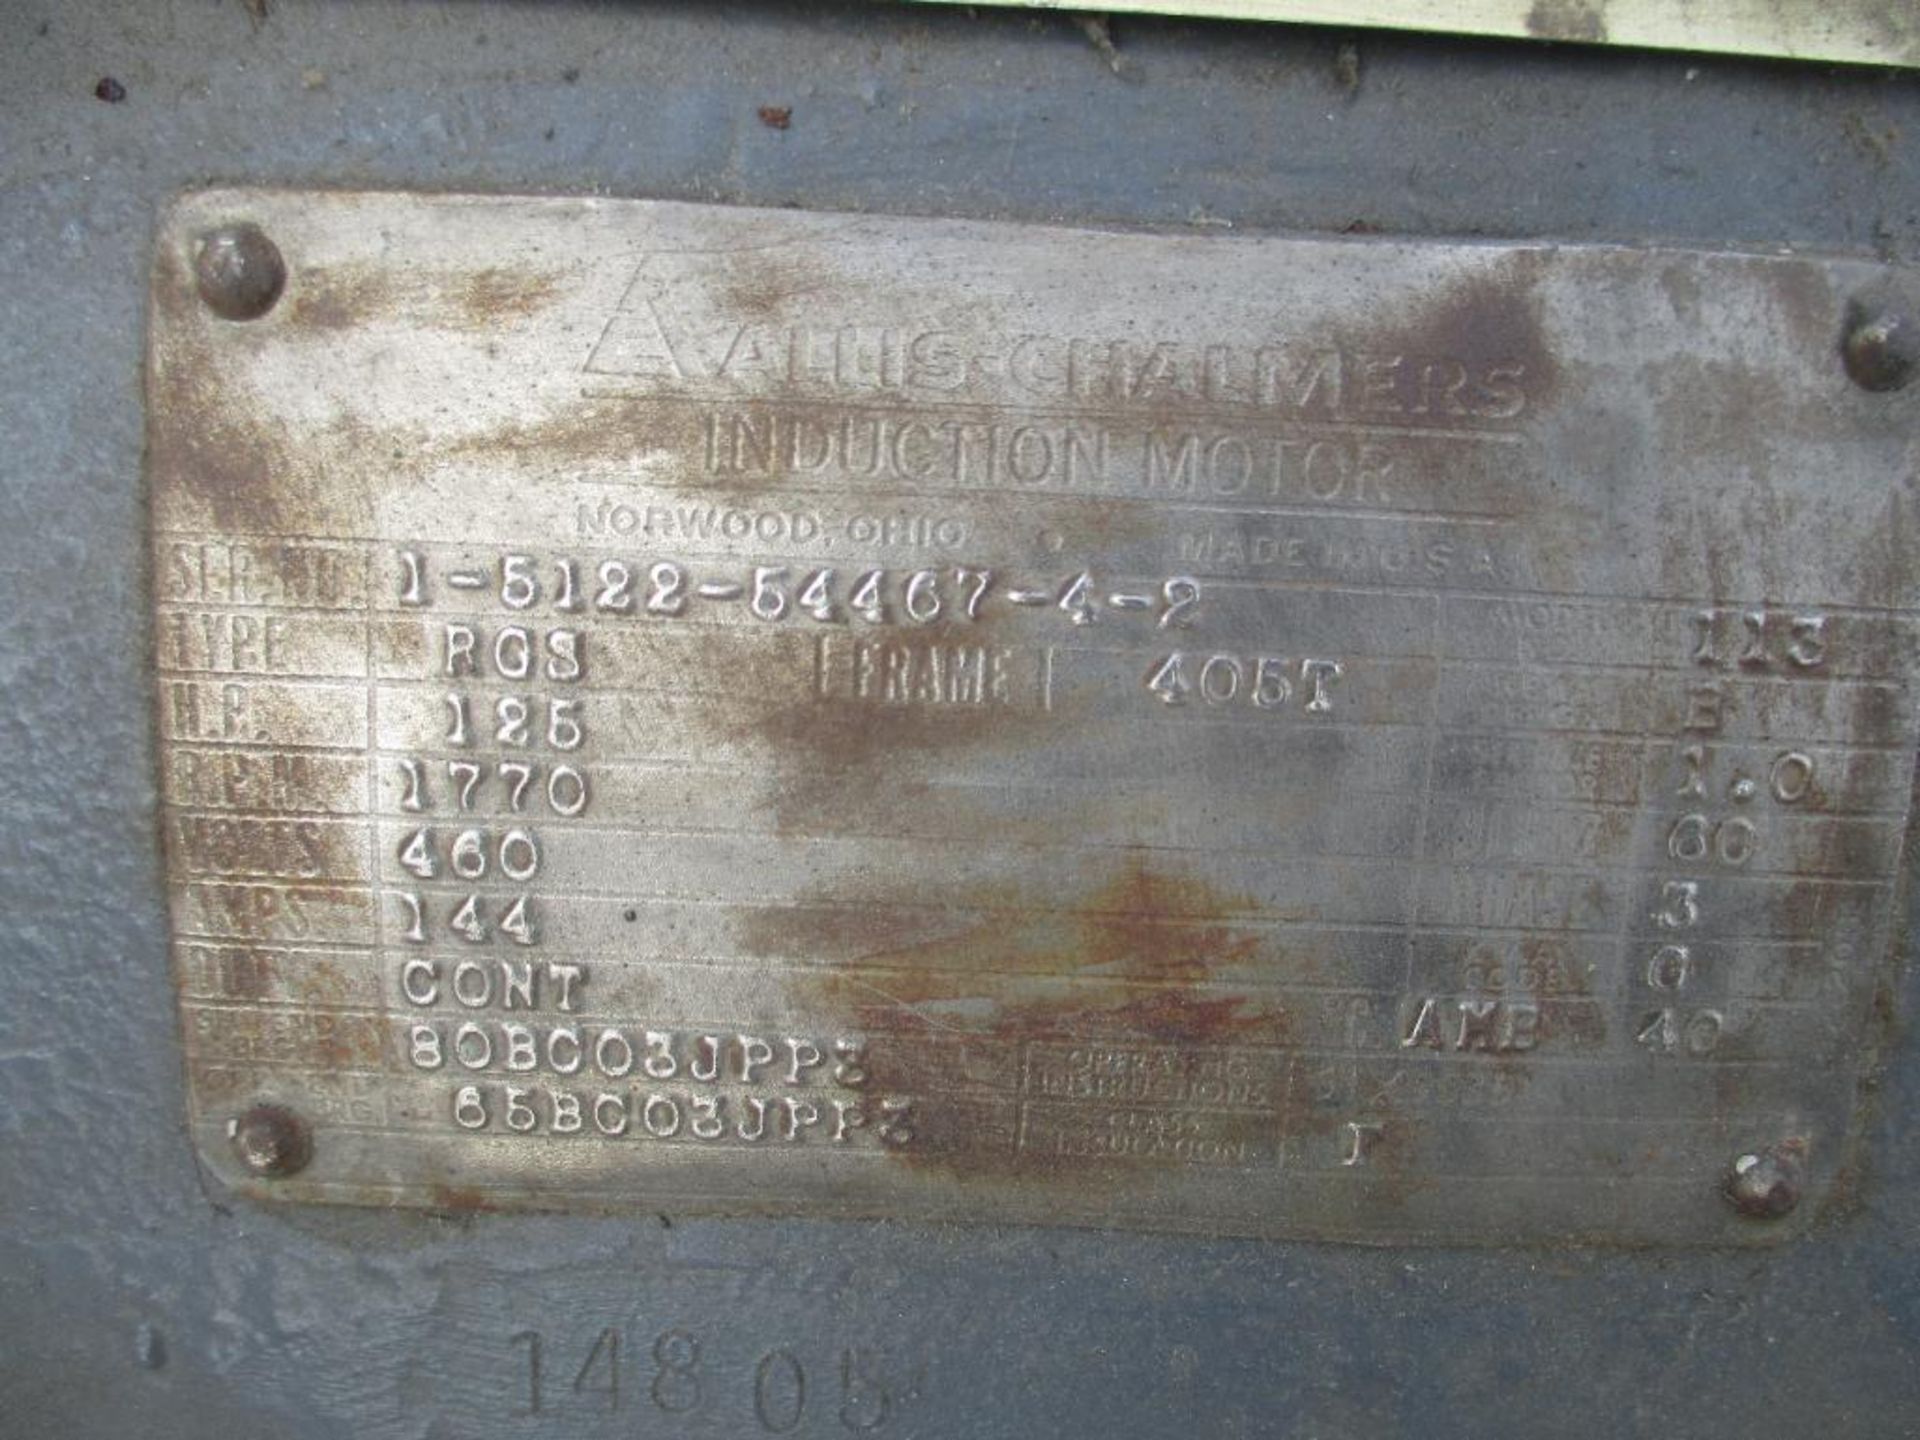 ALLIS CHALMERS 3 PHASE 125HP 1770RPM 405T FRAME A/C MOTOR P/N 1-5122-54467-4-2 1008# LBS (THIS LOT I - Image 2 of 5